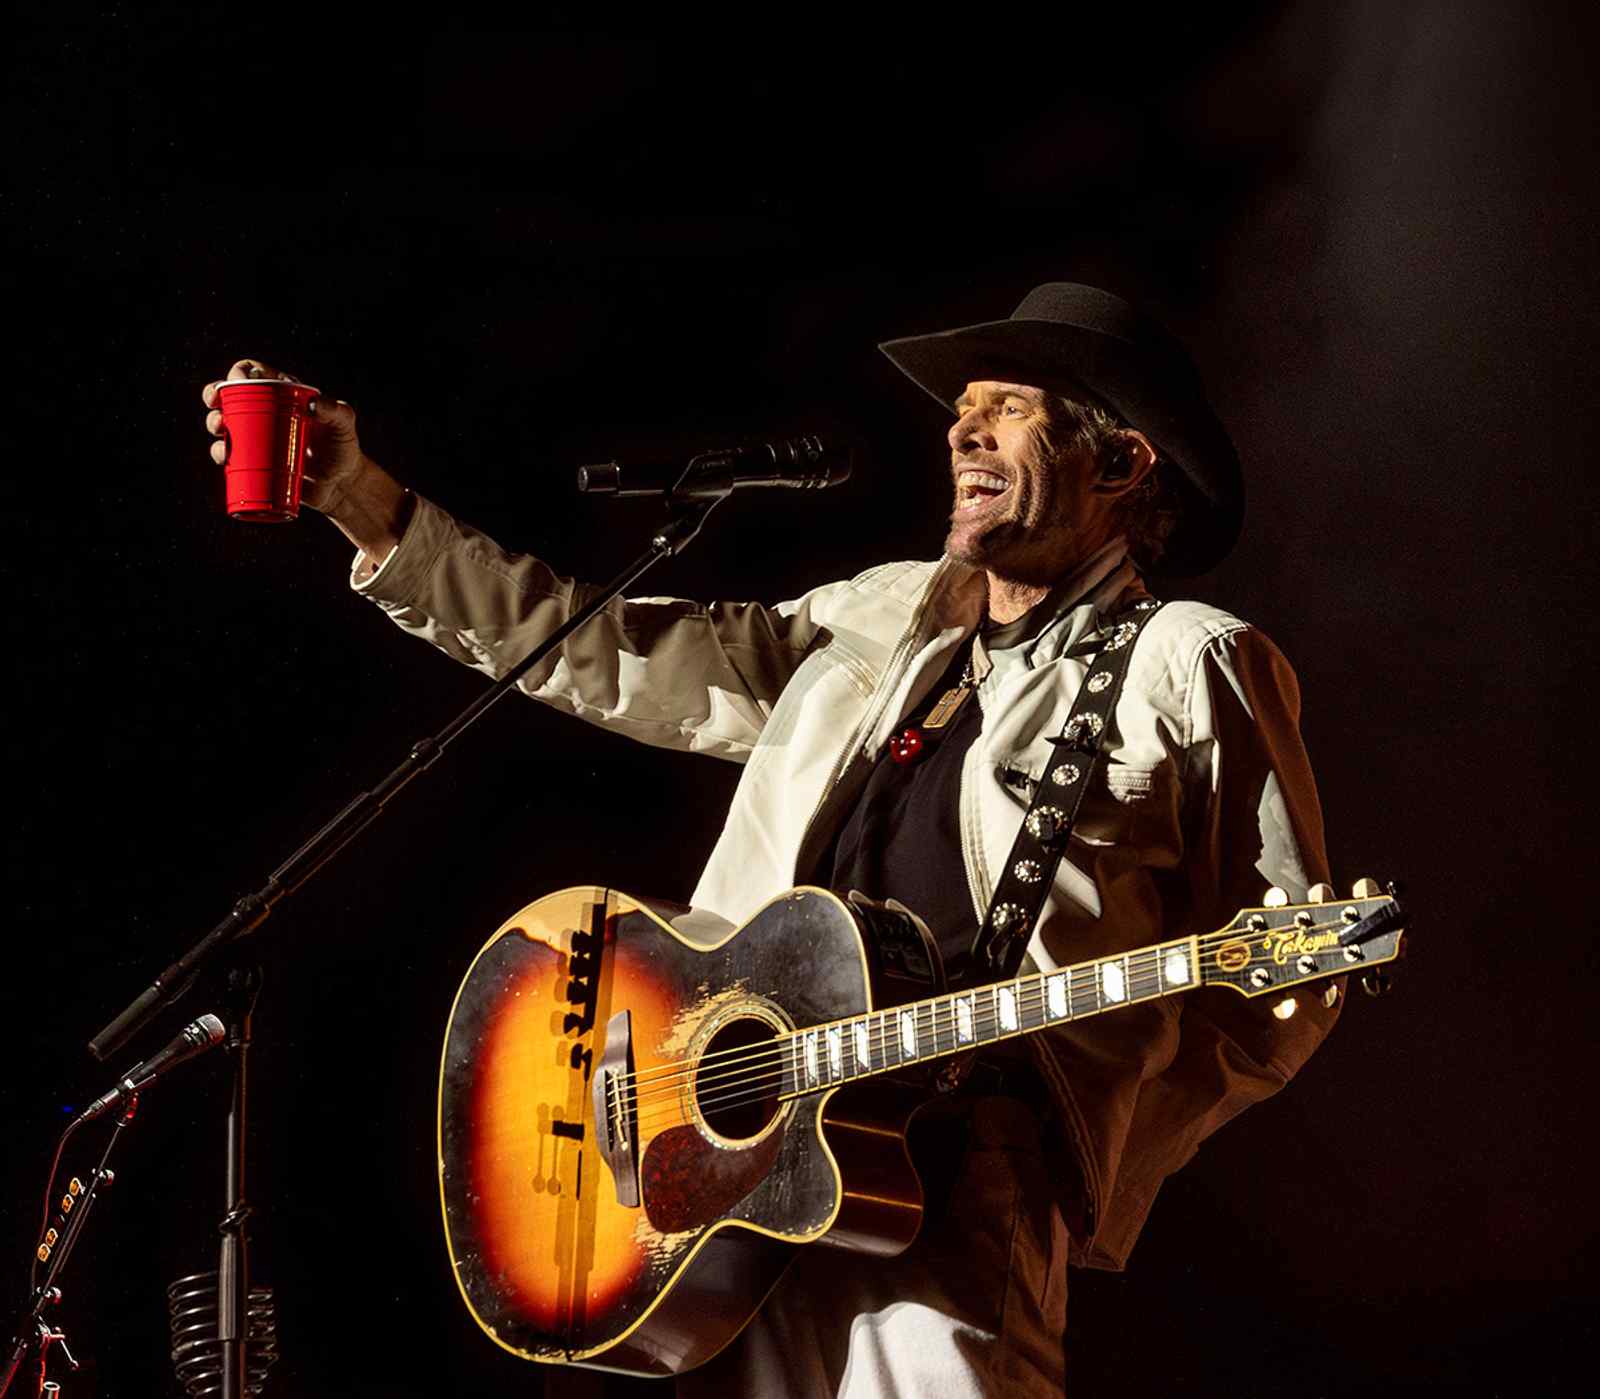 TOBY KEITH MAKES TRIUMPHANT RETURN TO STAGE IN LAS VEGAS